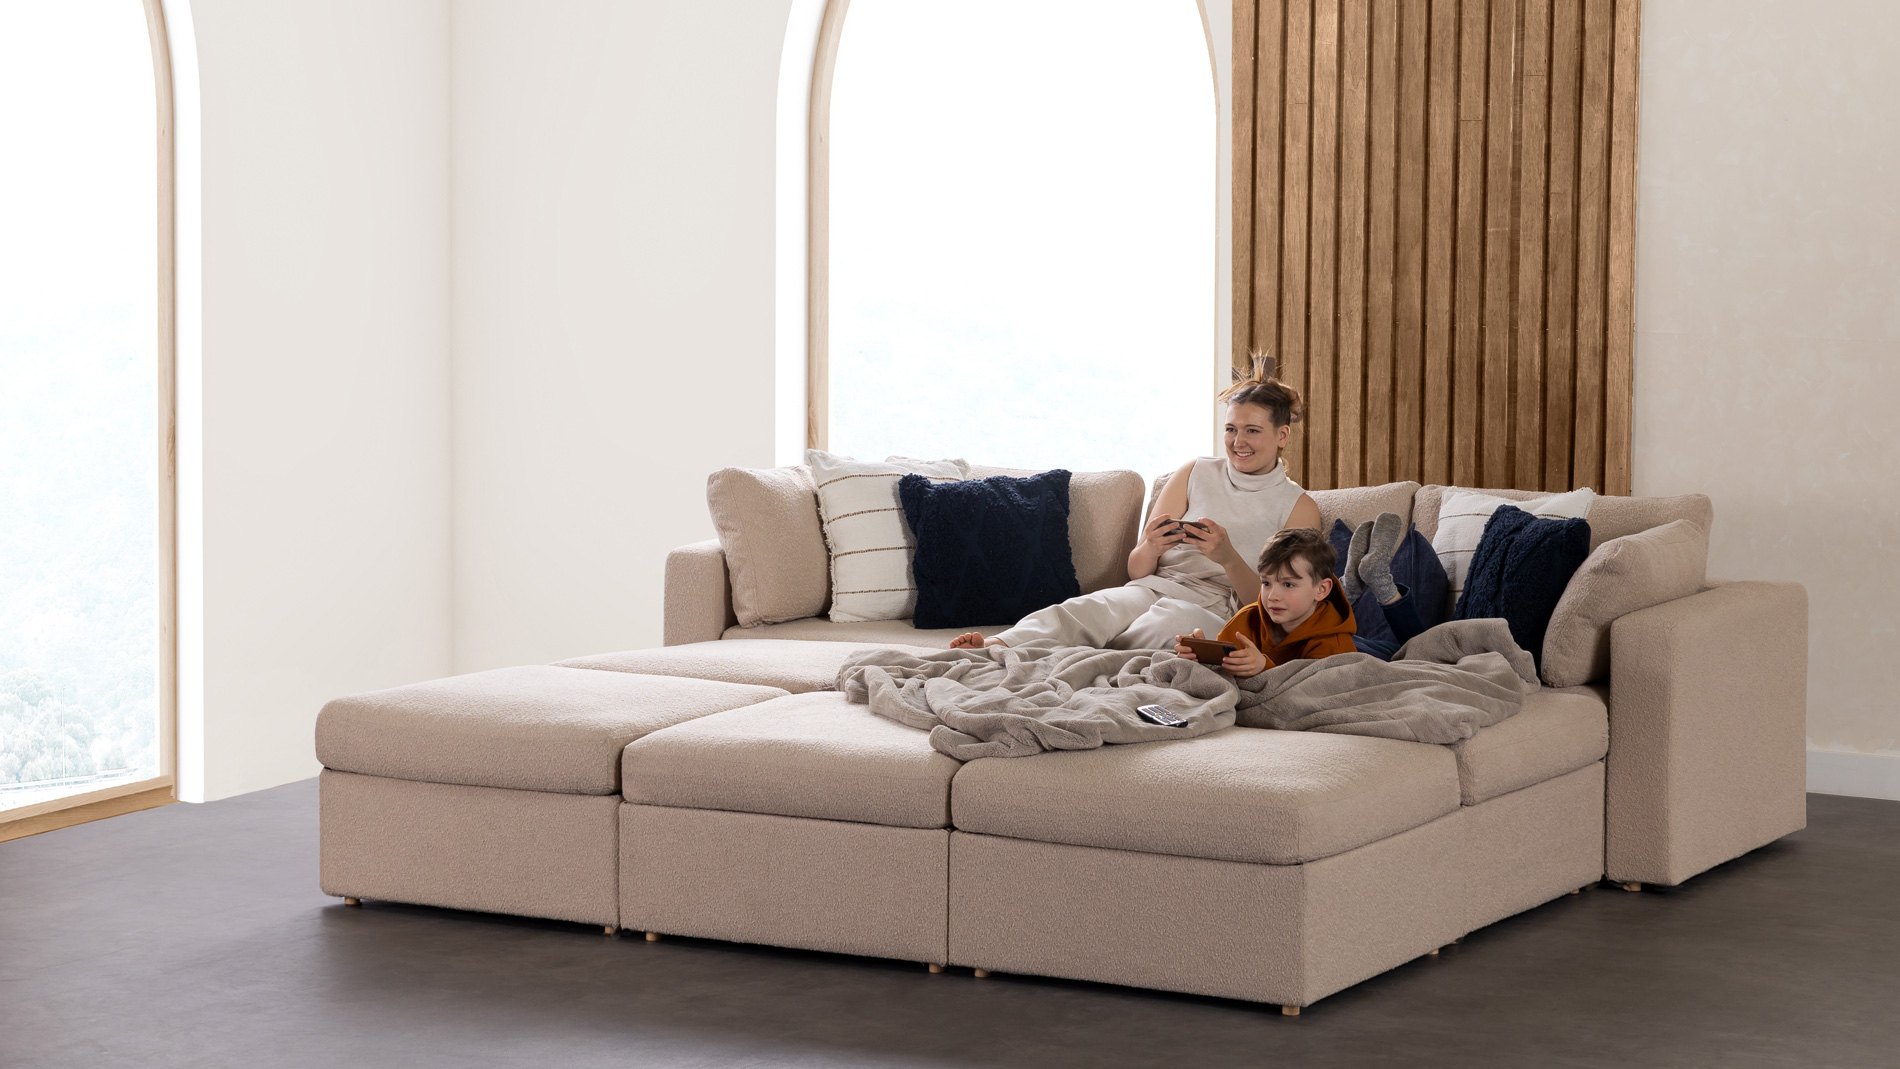 Kids space on modular couch